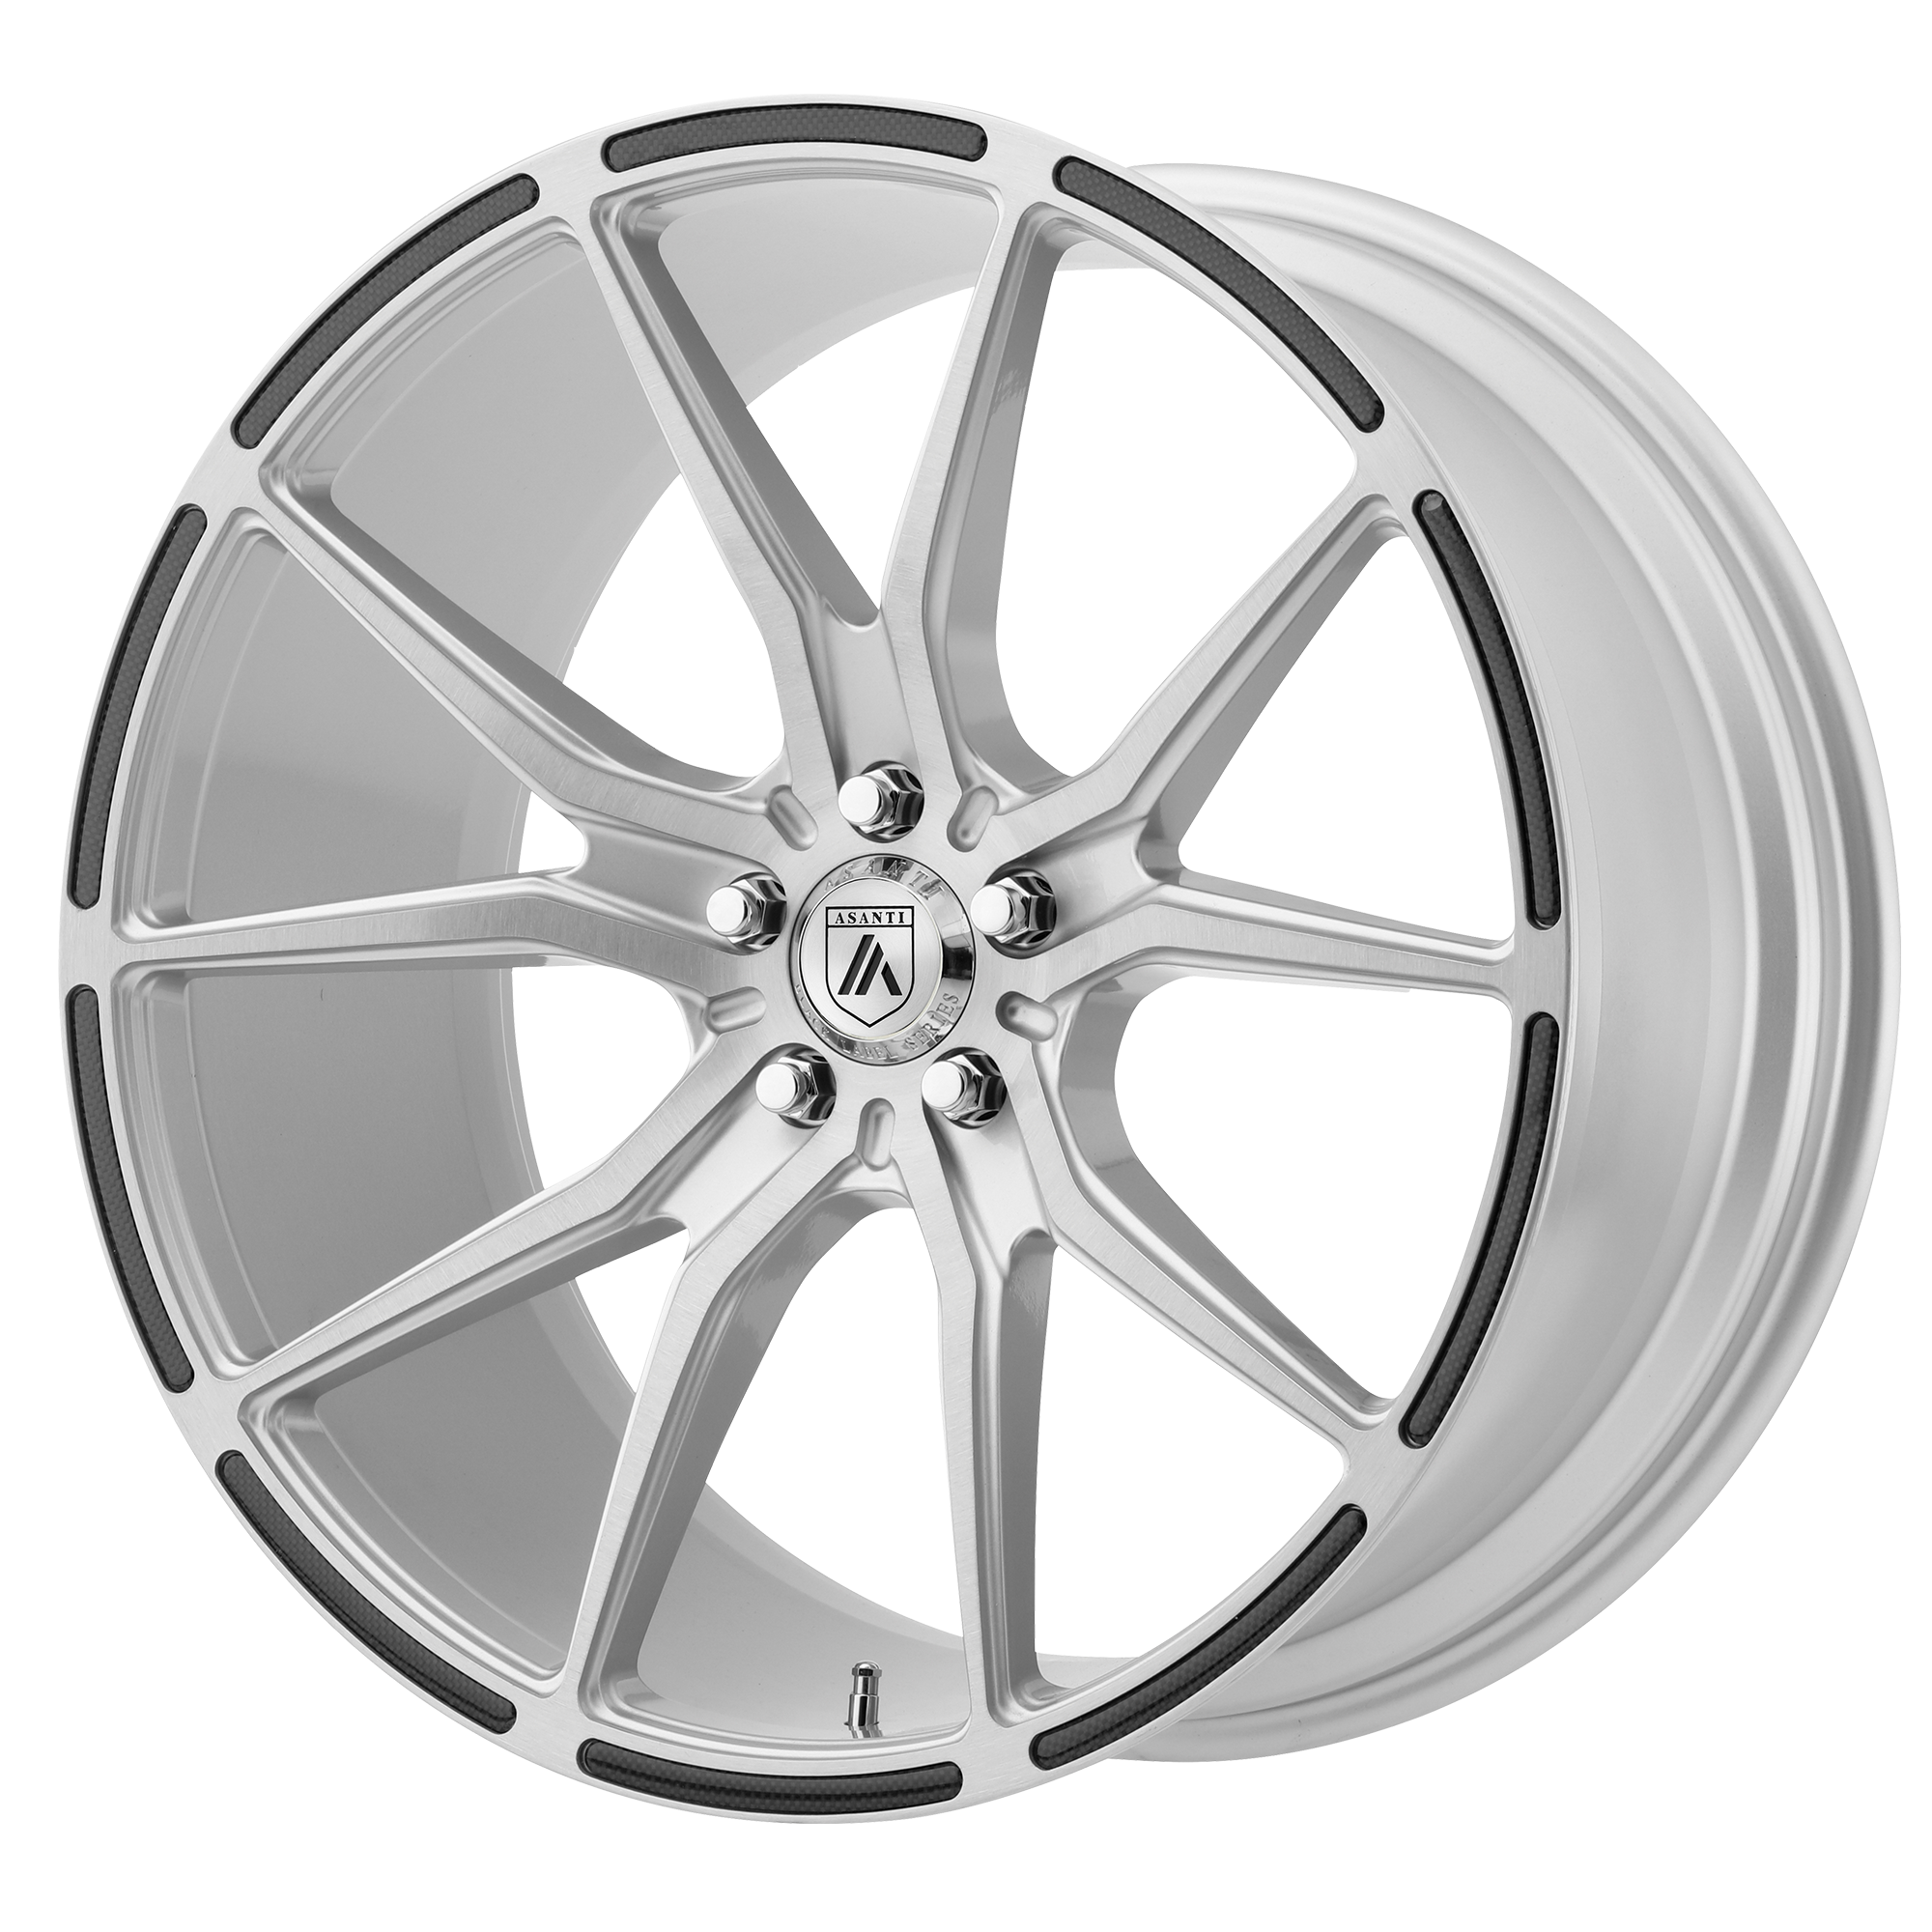 VEGA 20x9 5x114.30 BRUSHED SILVER W/ CARBON FIBER INSERTS (35 mm) - Tires and Engine Performance